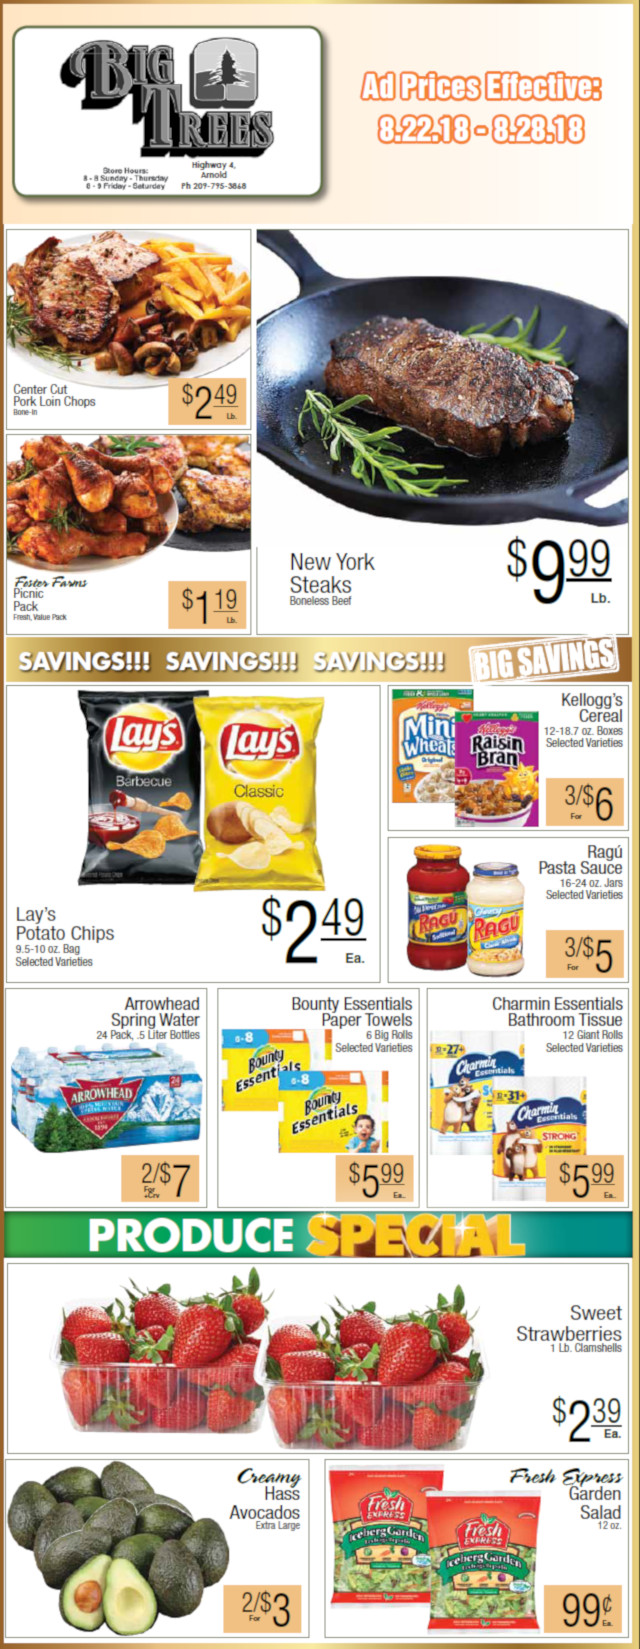 Big Trees Market Weekly Ad & Grocery Specials Through August 28th